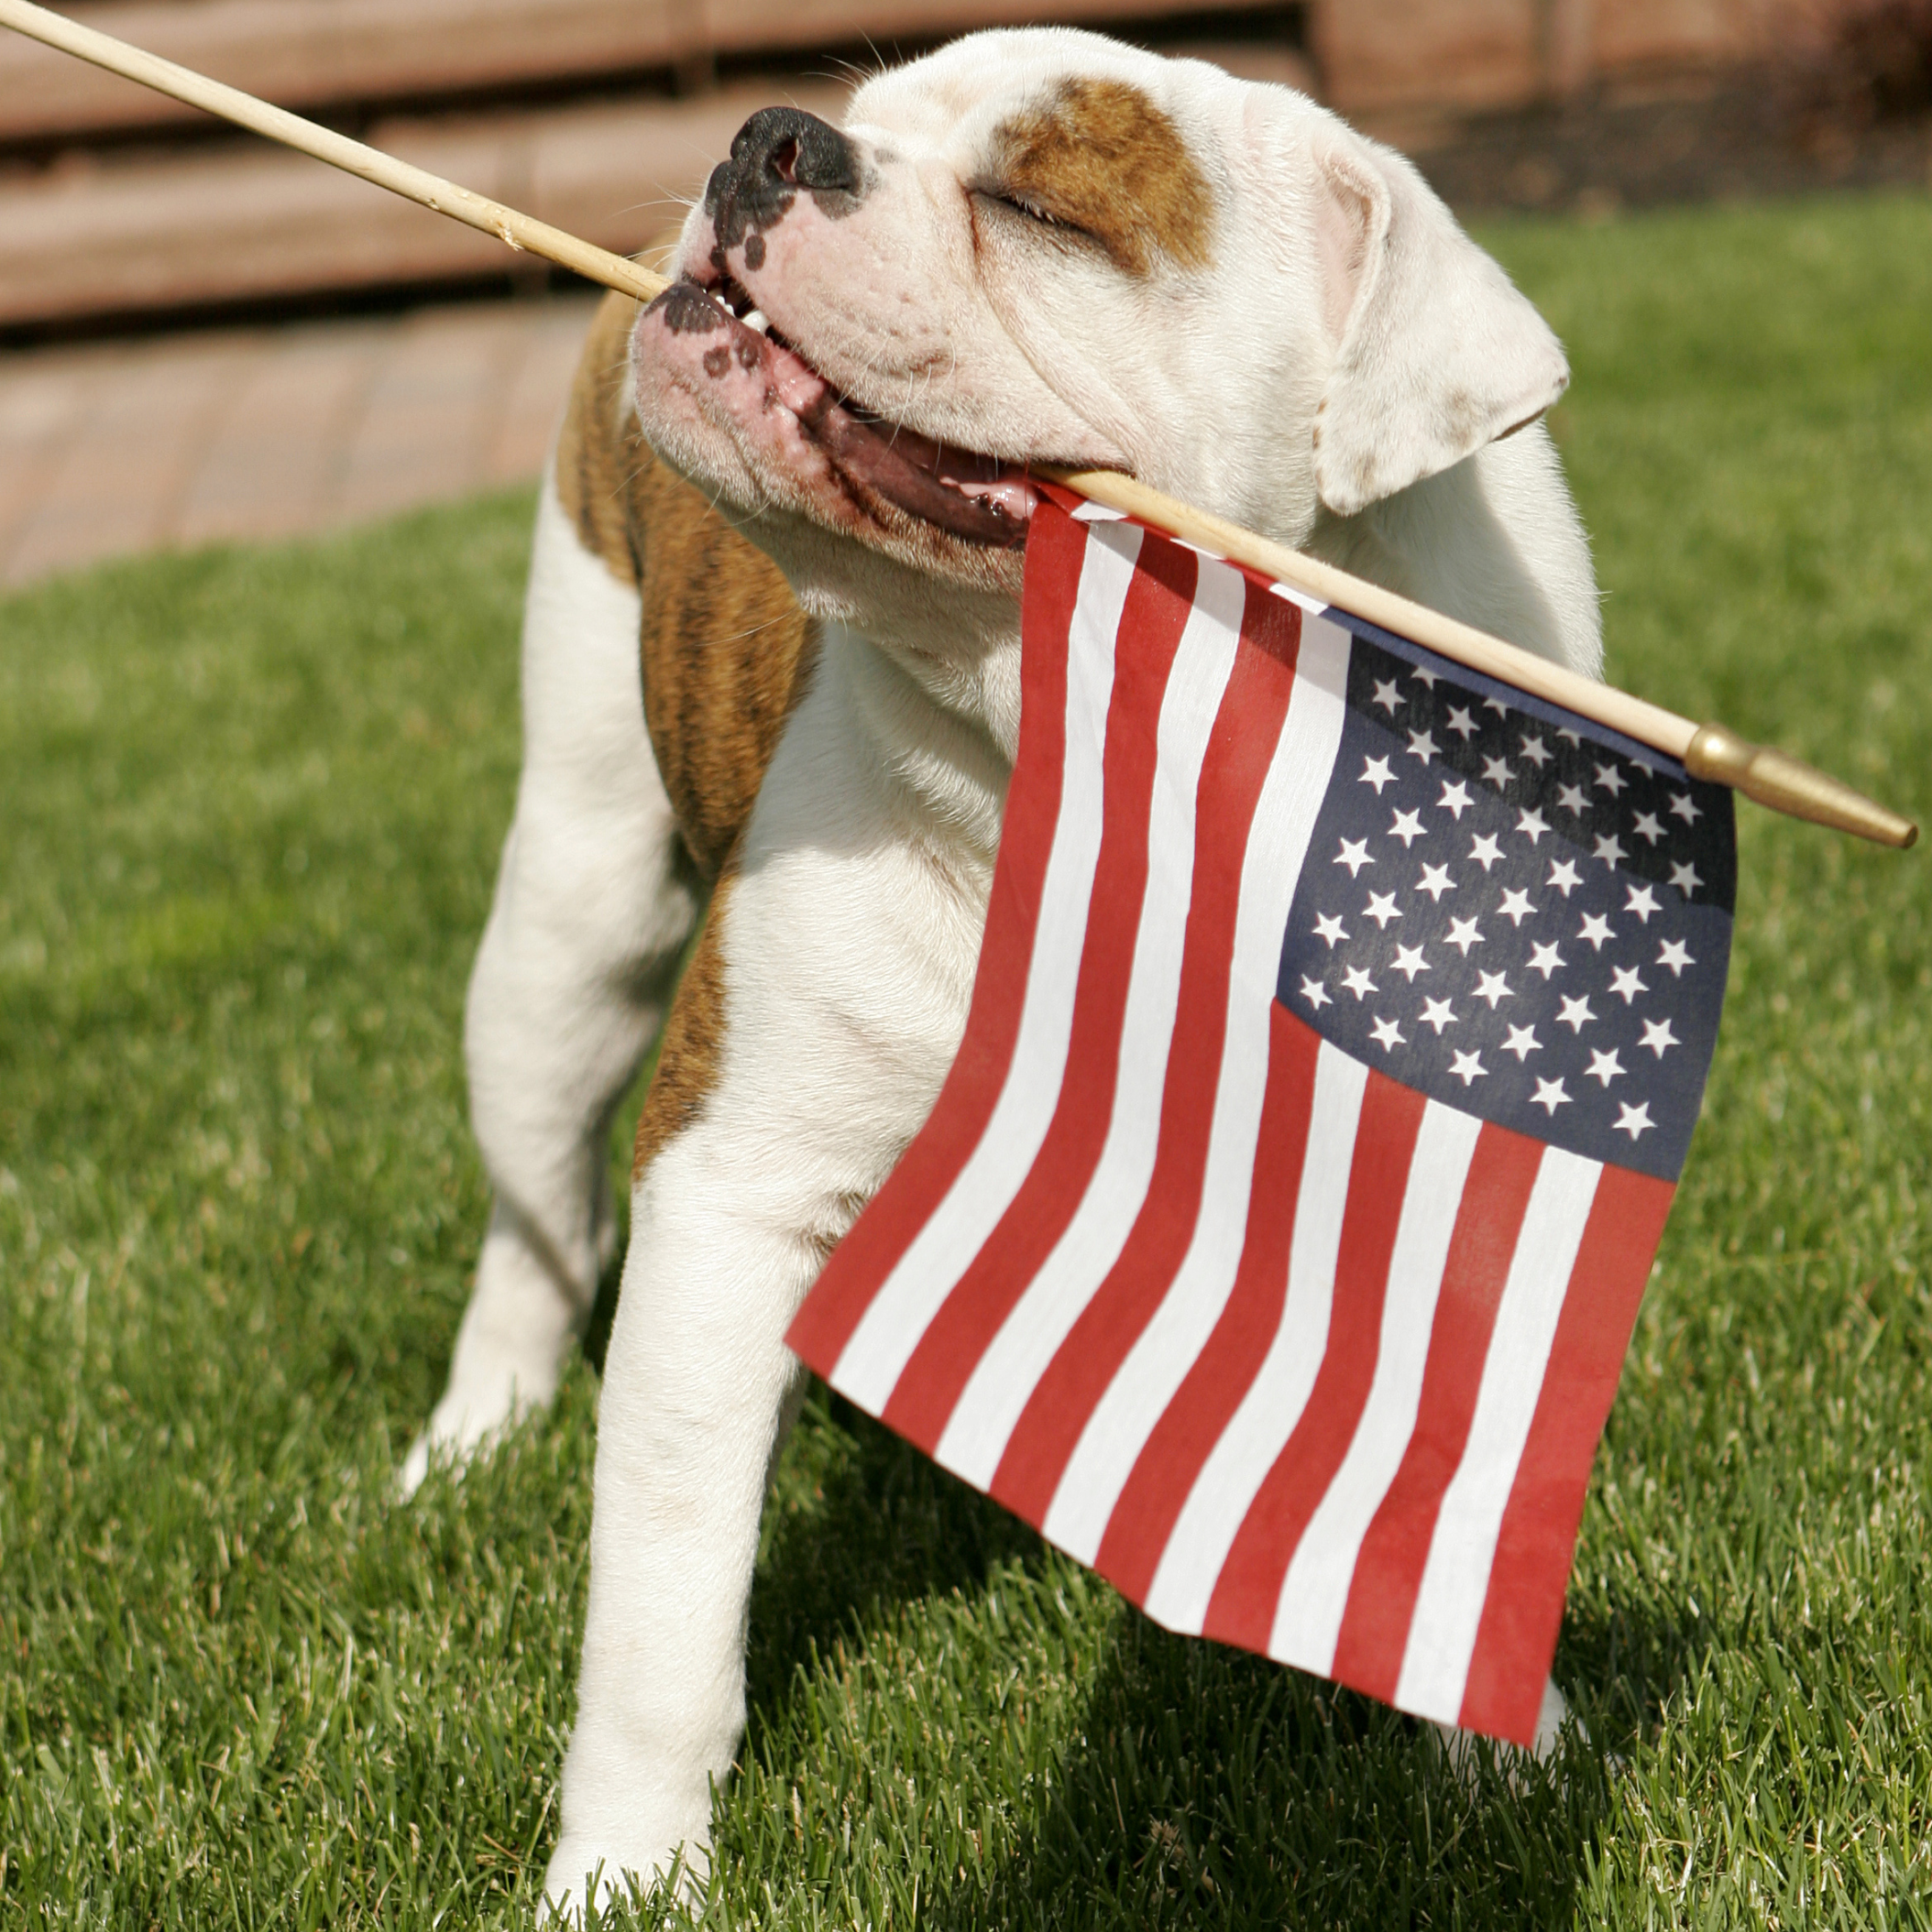 A picture of a happy dog with his eyes closed, holding a small U.S. flag in his mouth.